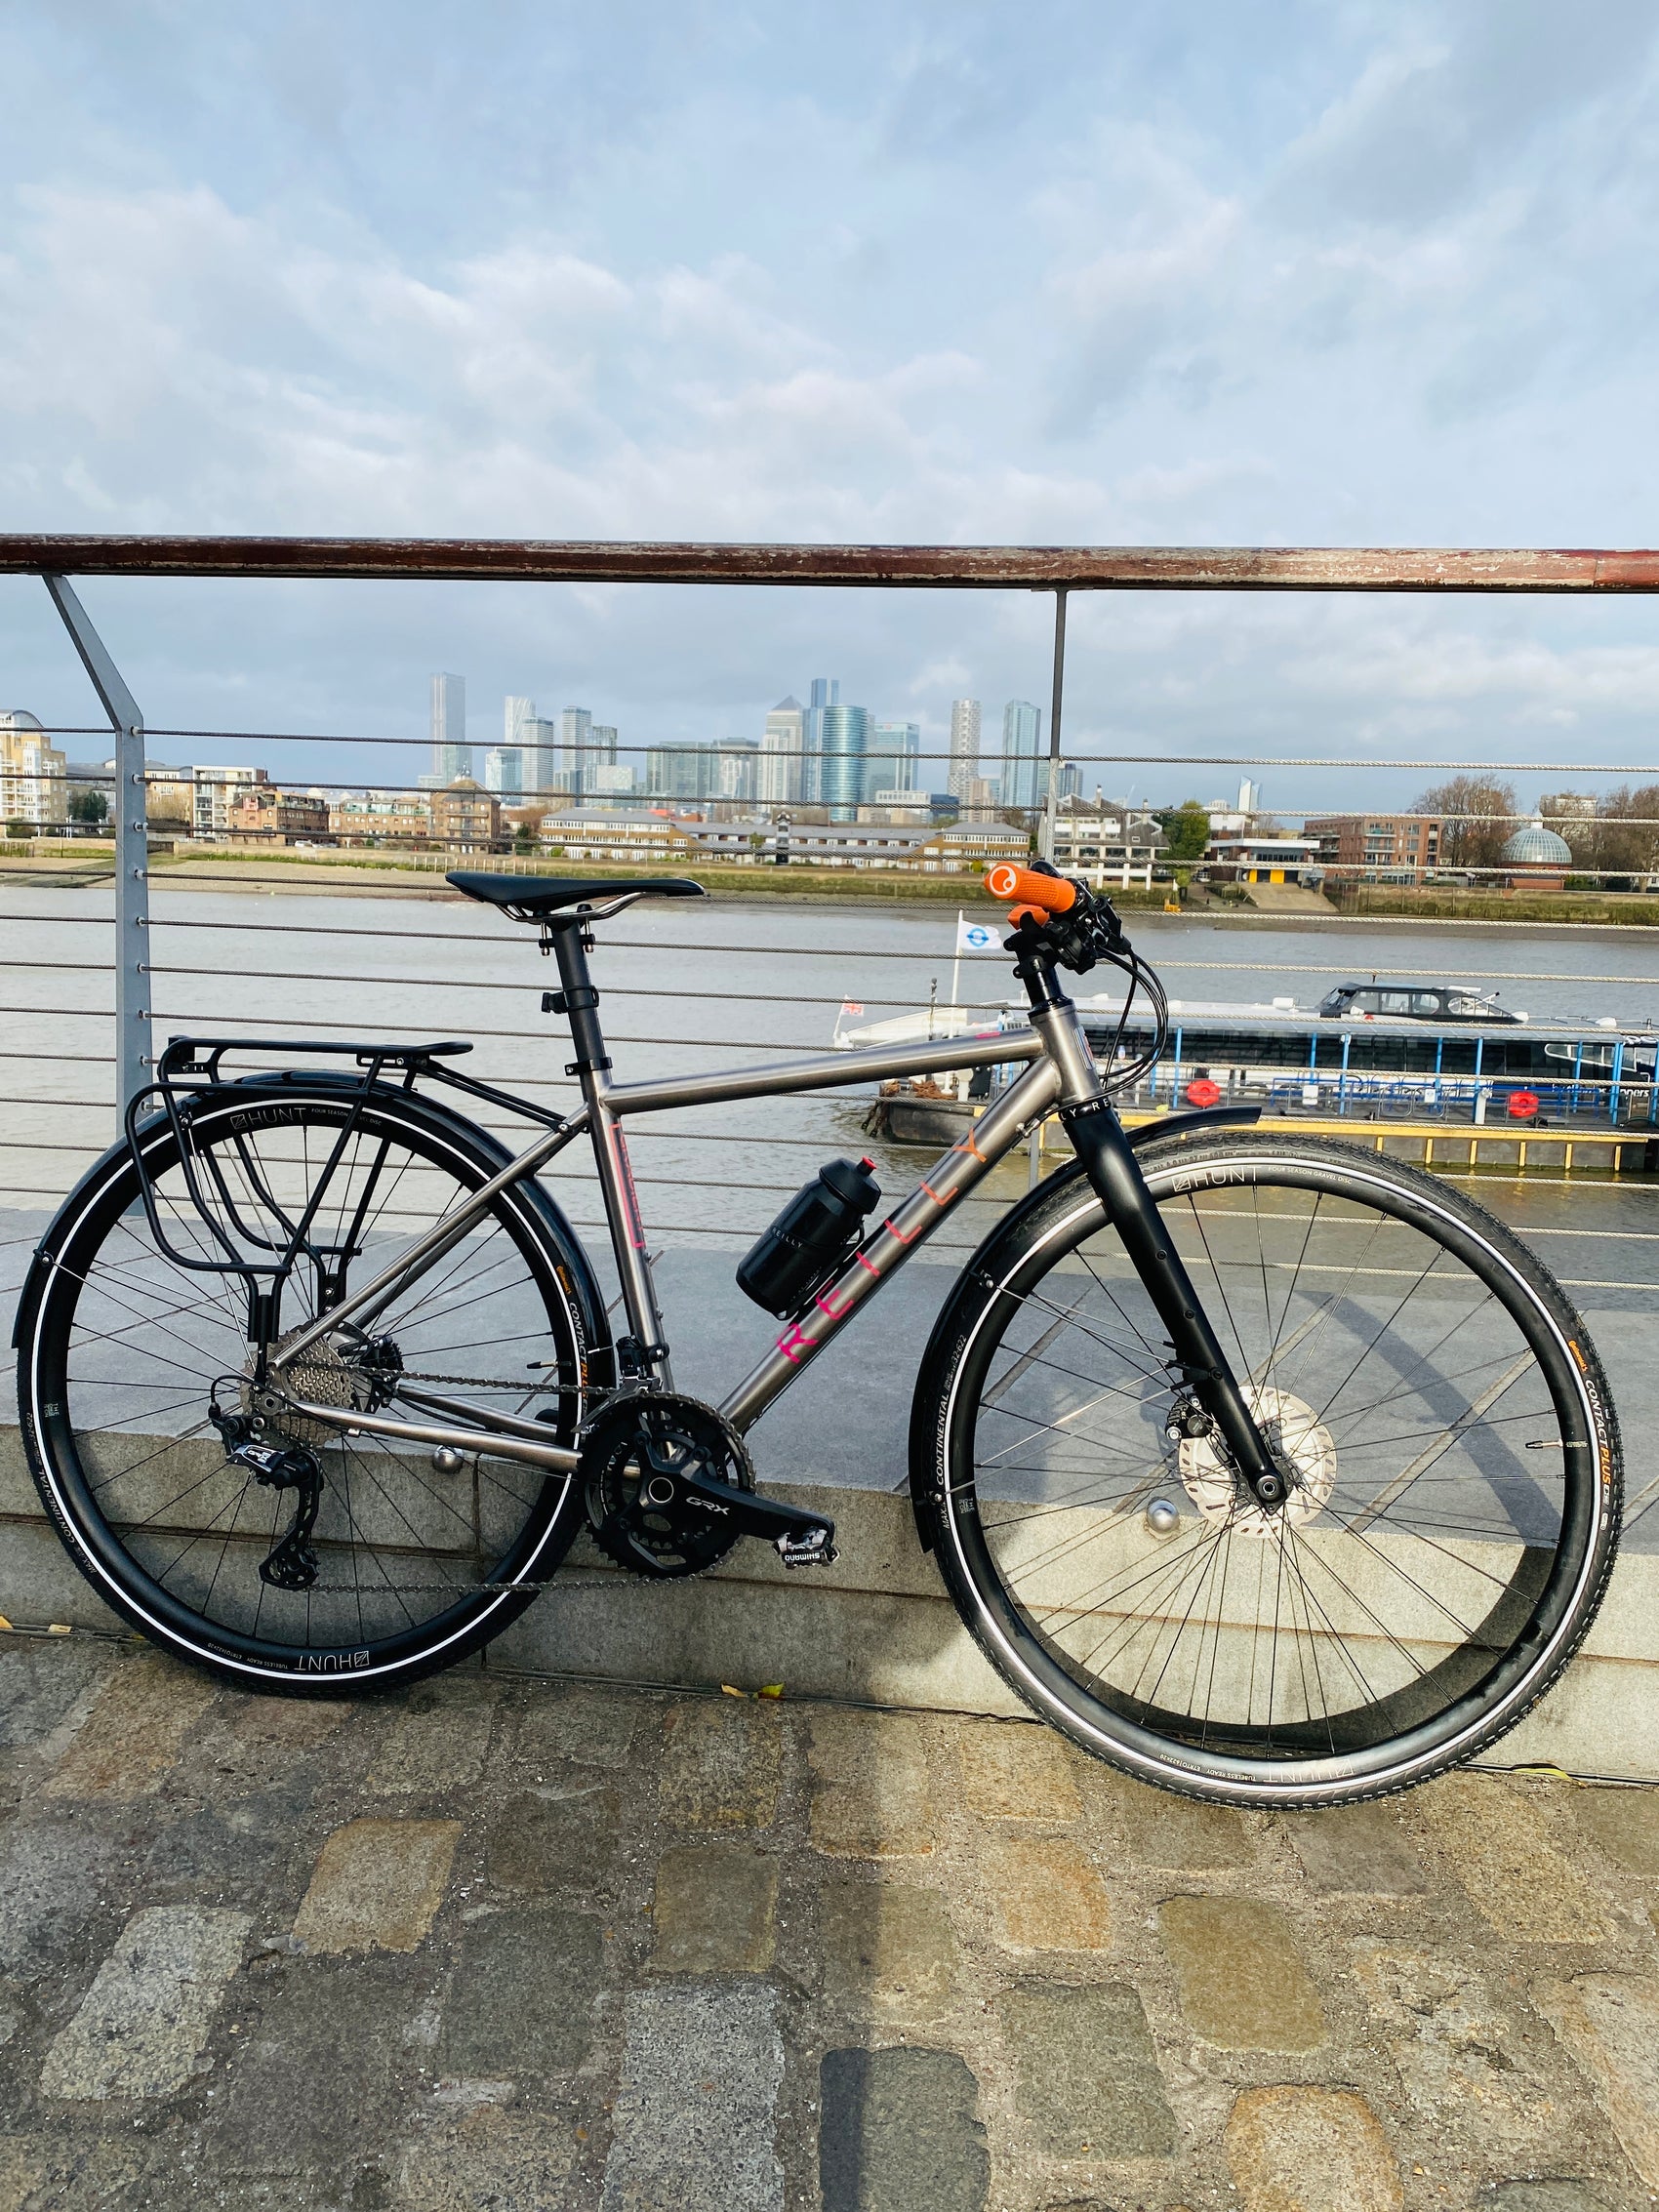 Gravle bike with flat handlebars in the foreground.  Canary Wharf skyline is in the background.